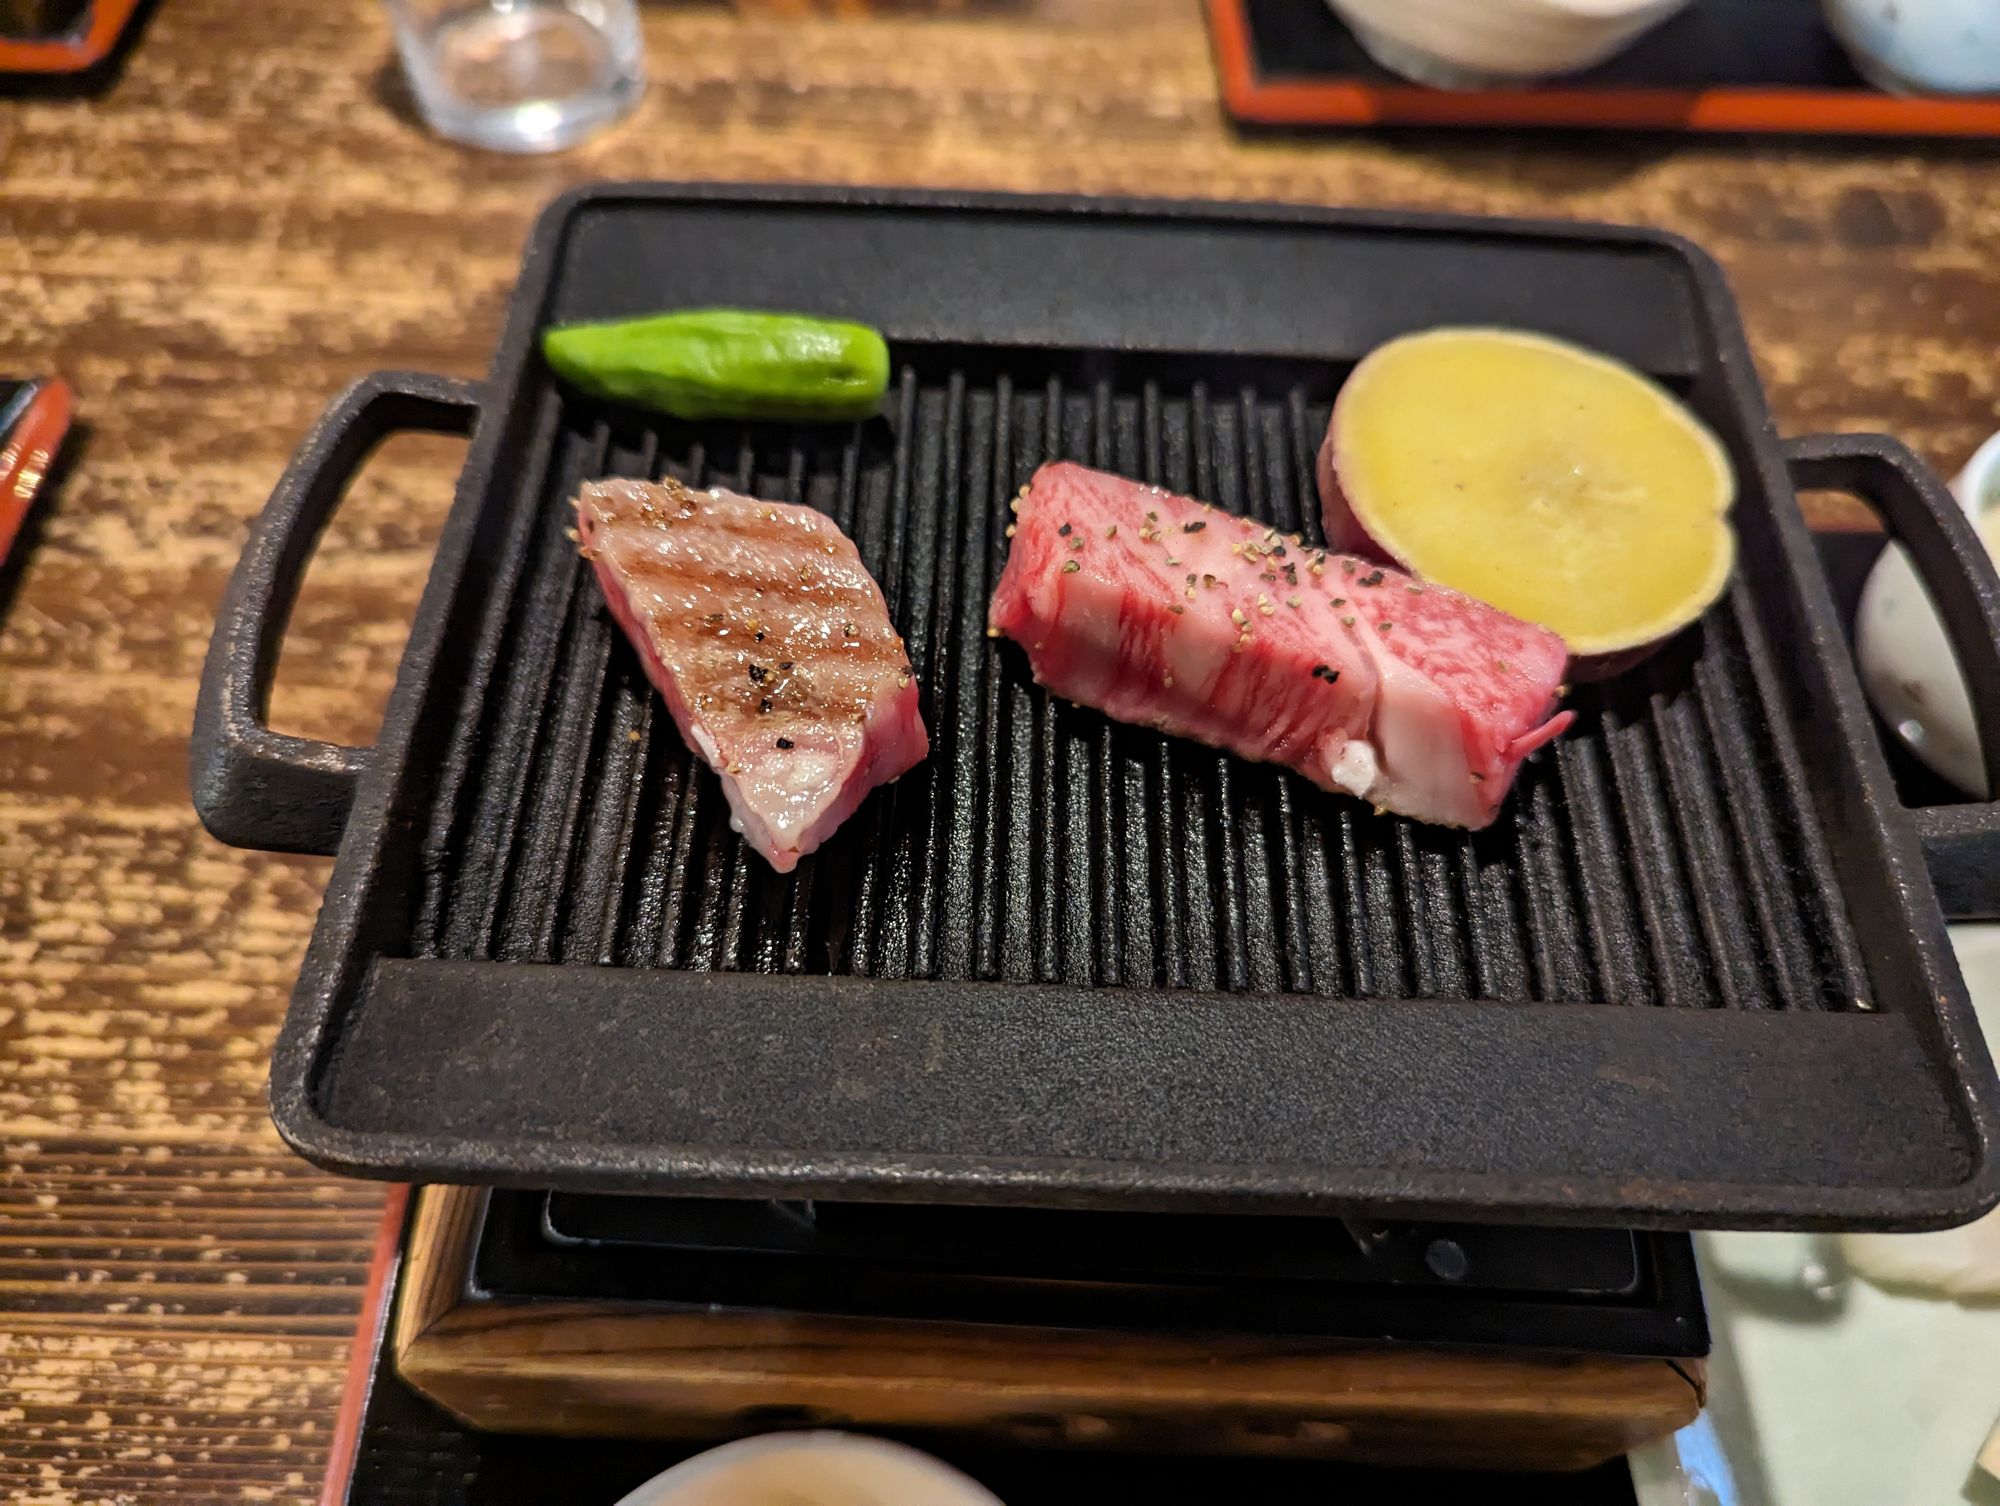 Stacy: Day 11 - An Introduction to Hida Beef